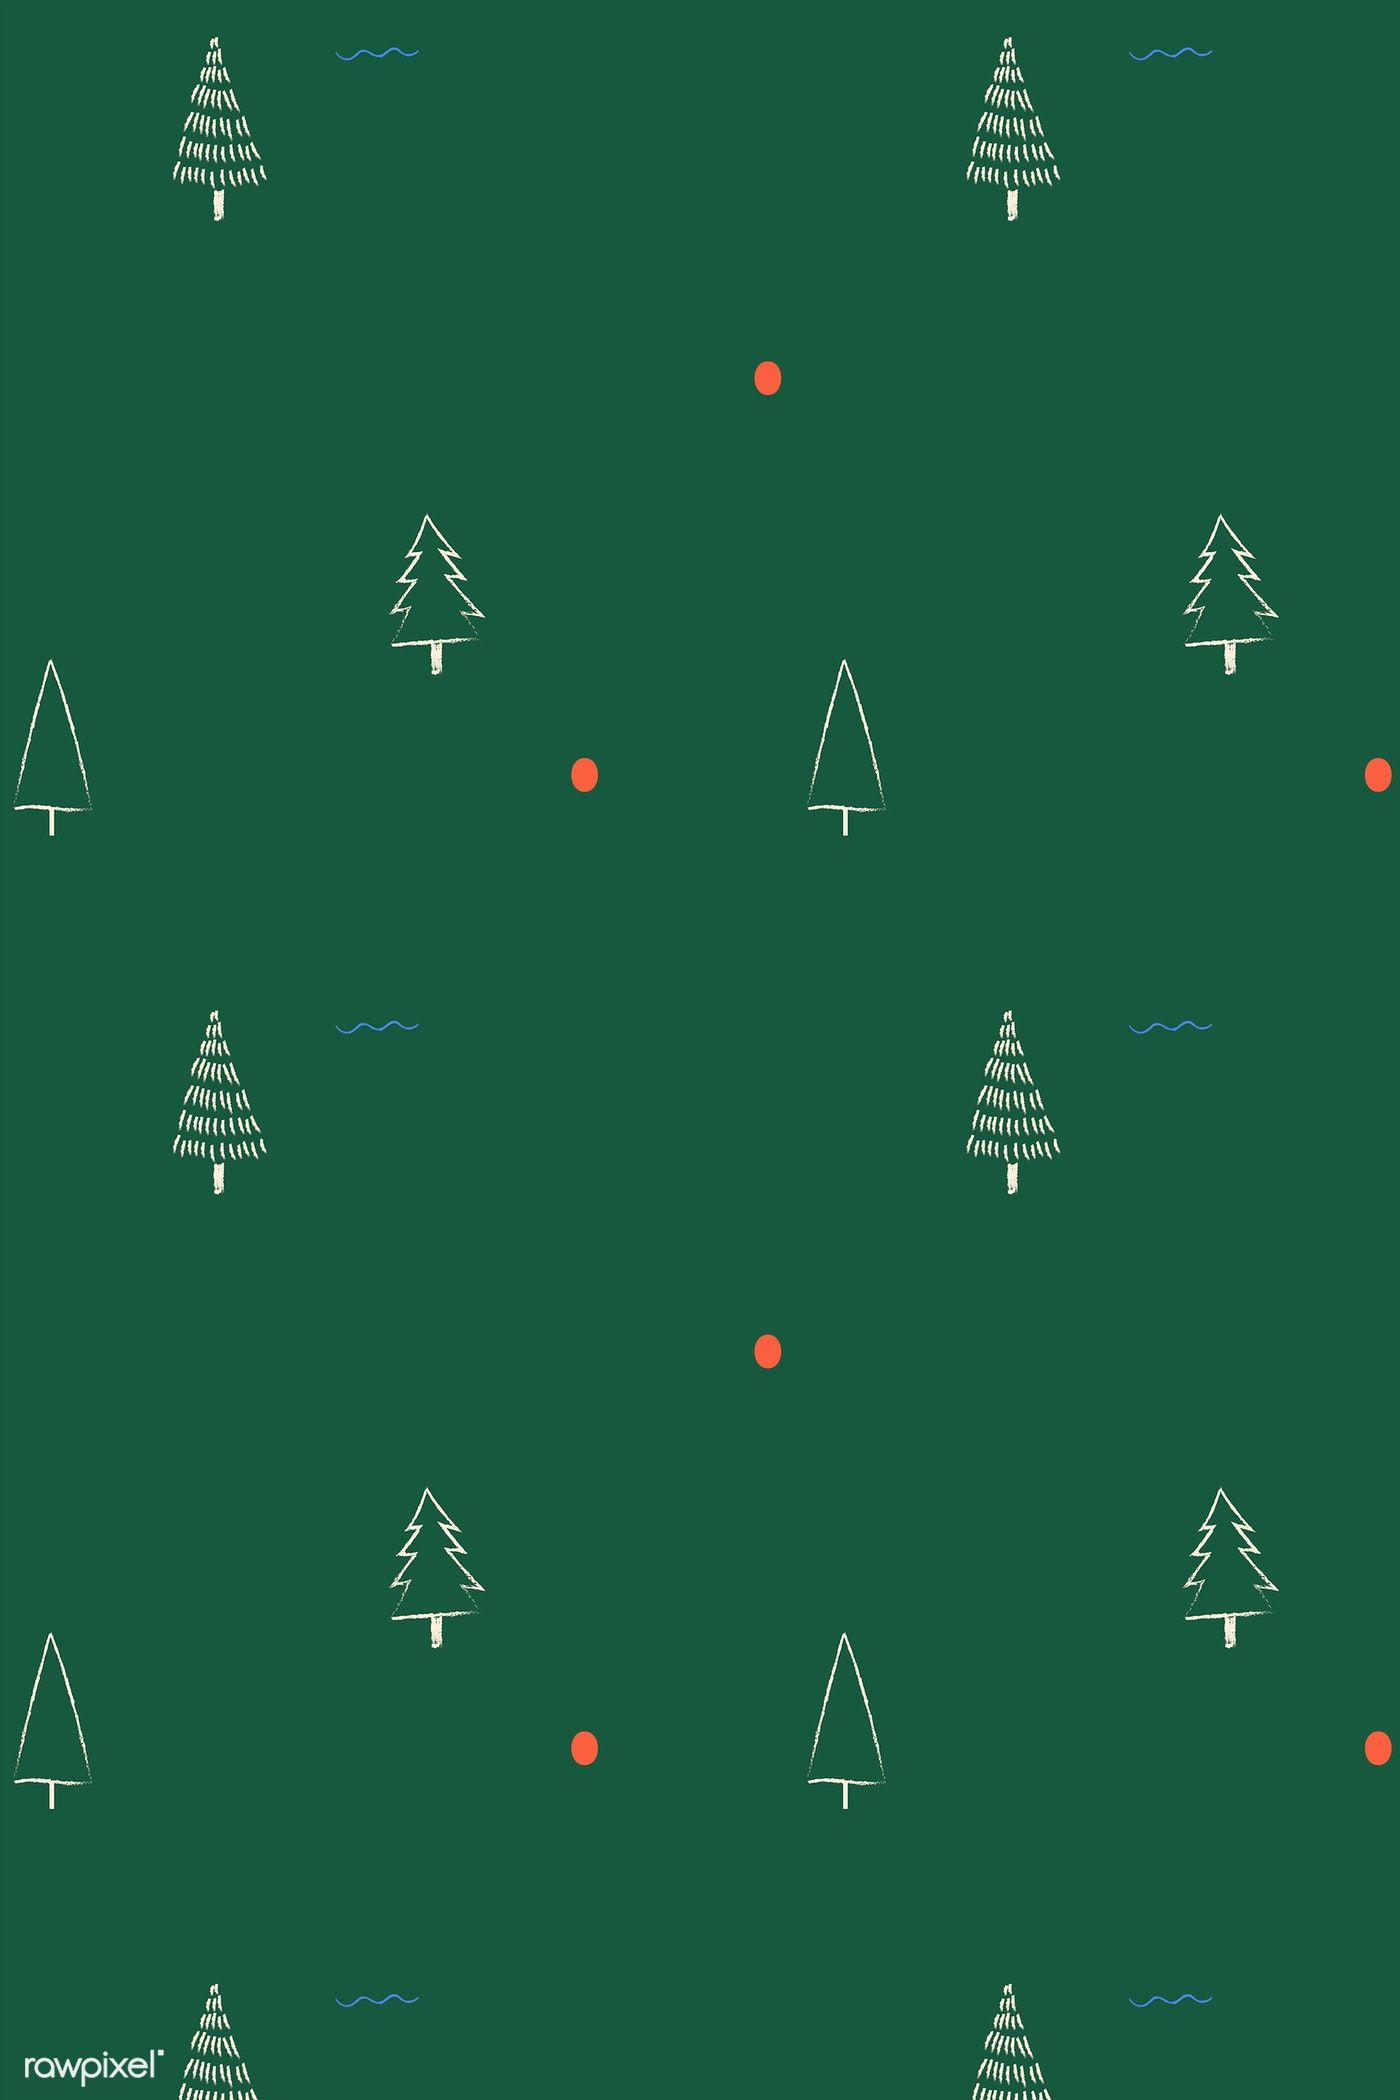 20 Christmas Wallpapers  Backgrounds for Your Holiday Celebration  Fotor